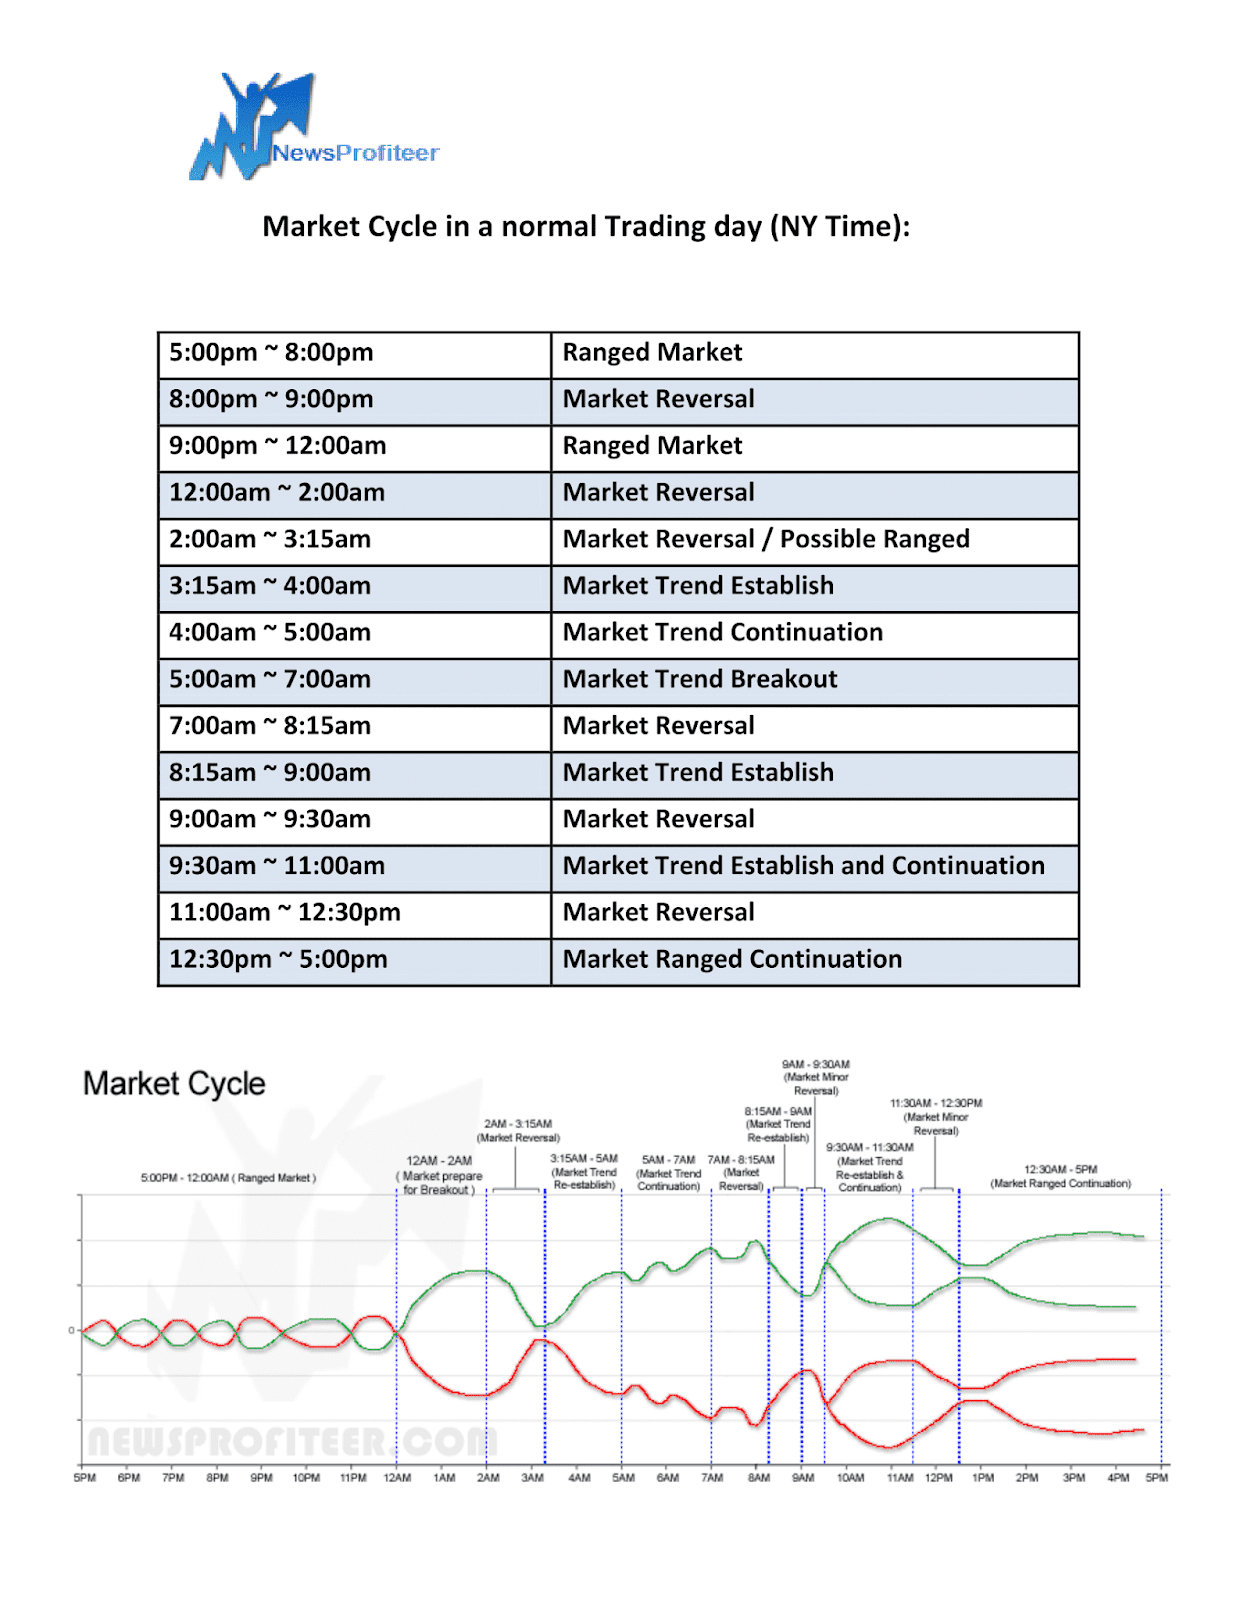 Market Cycle in a normal Trading day (NY Time)